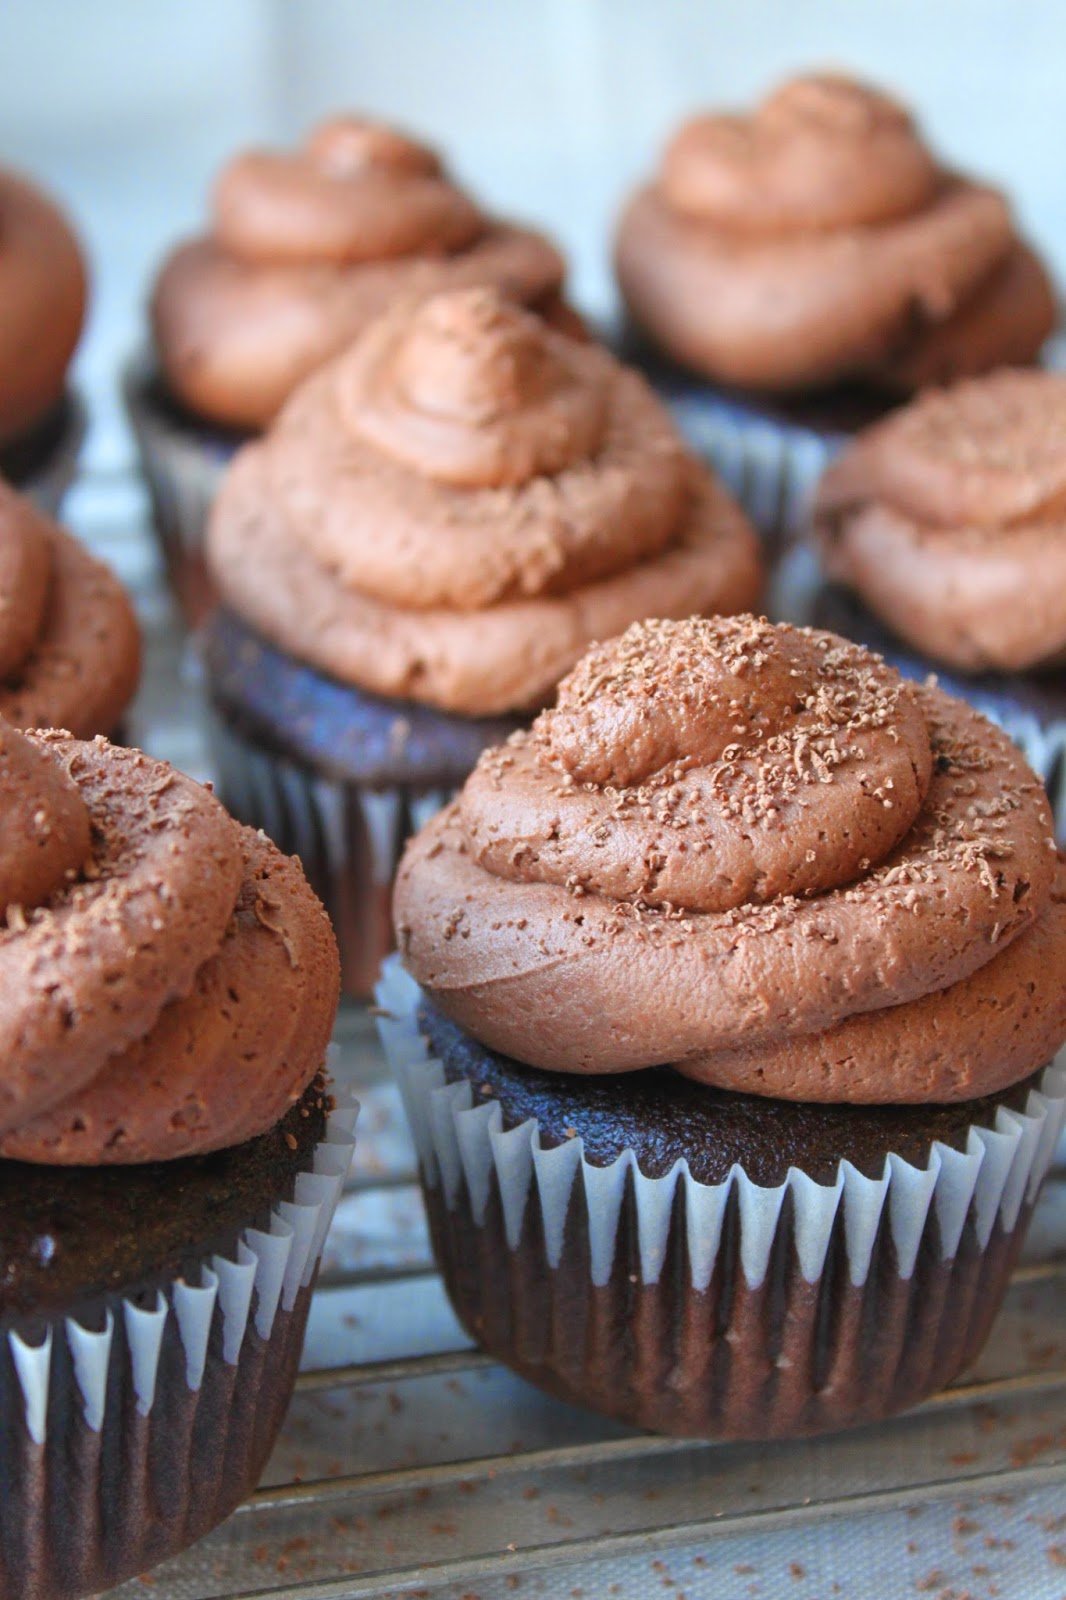 batch of chocolate cupcakes with chocolate buttercream